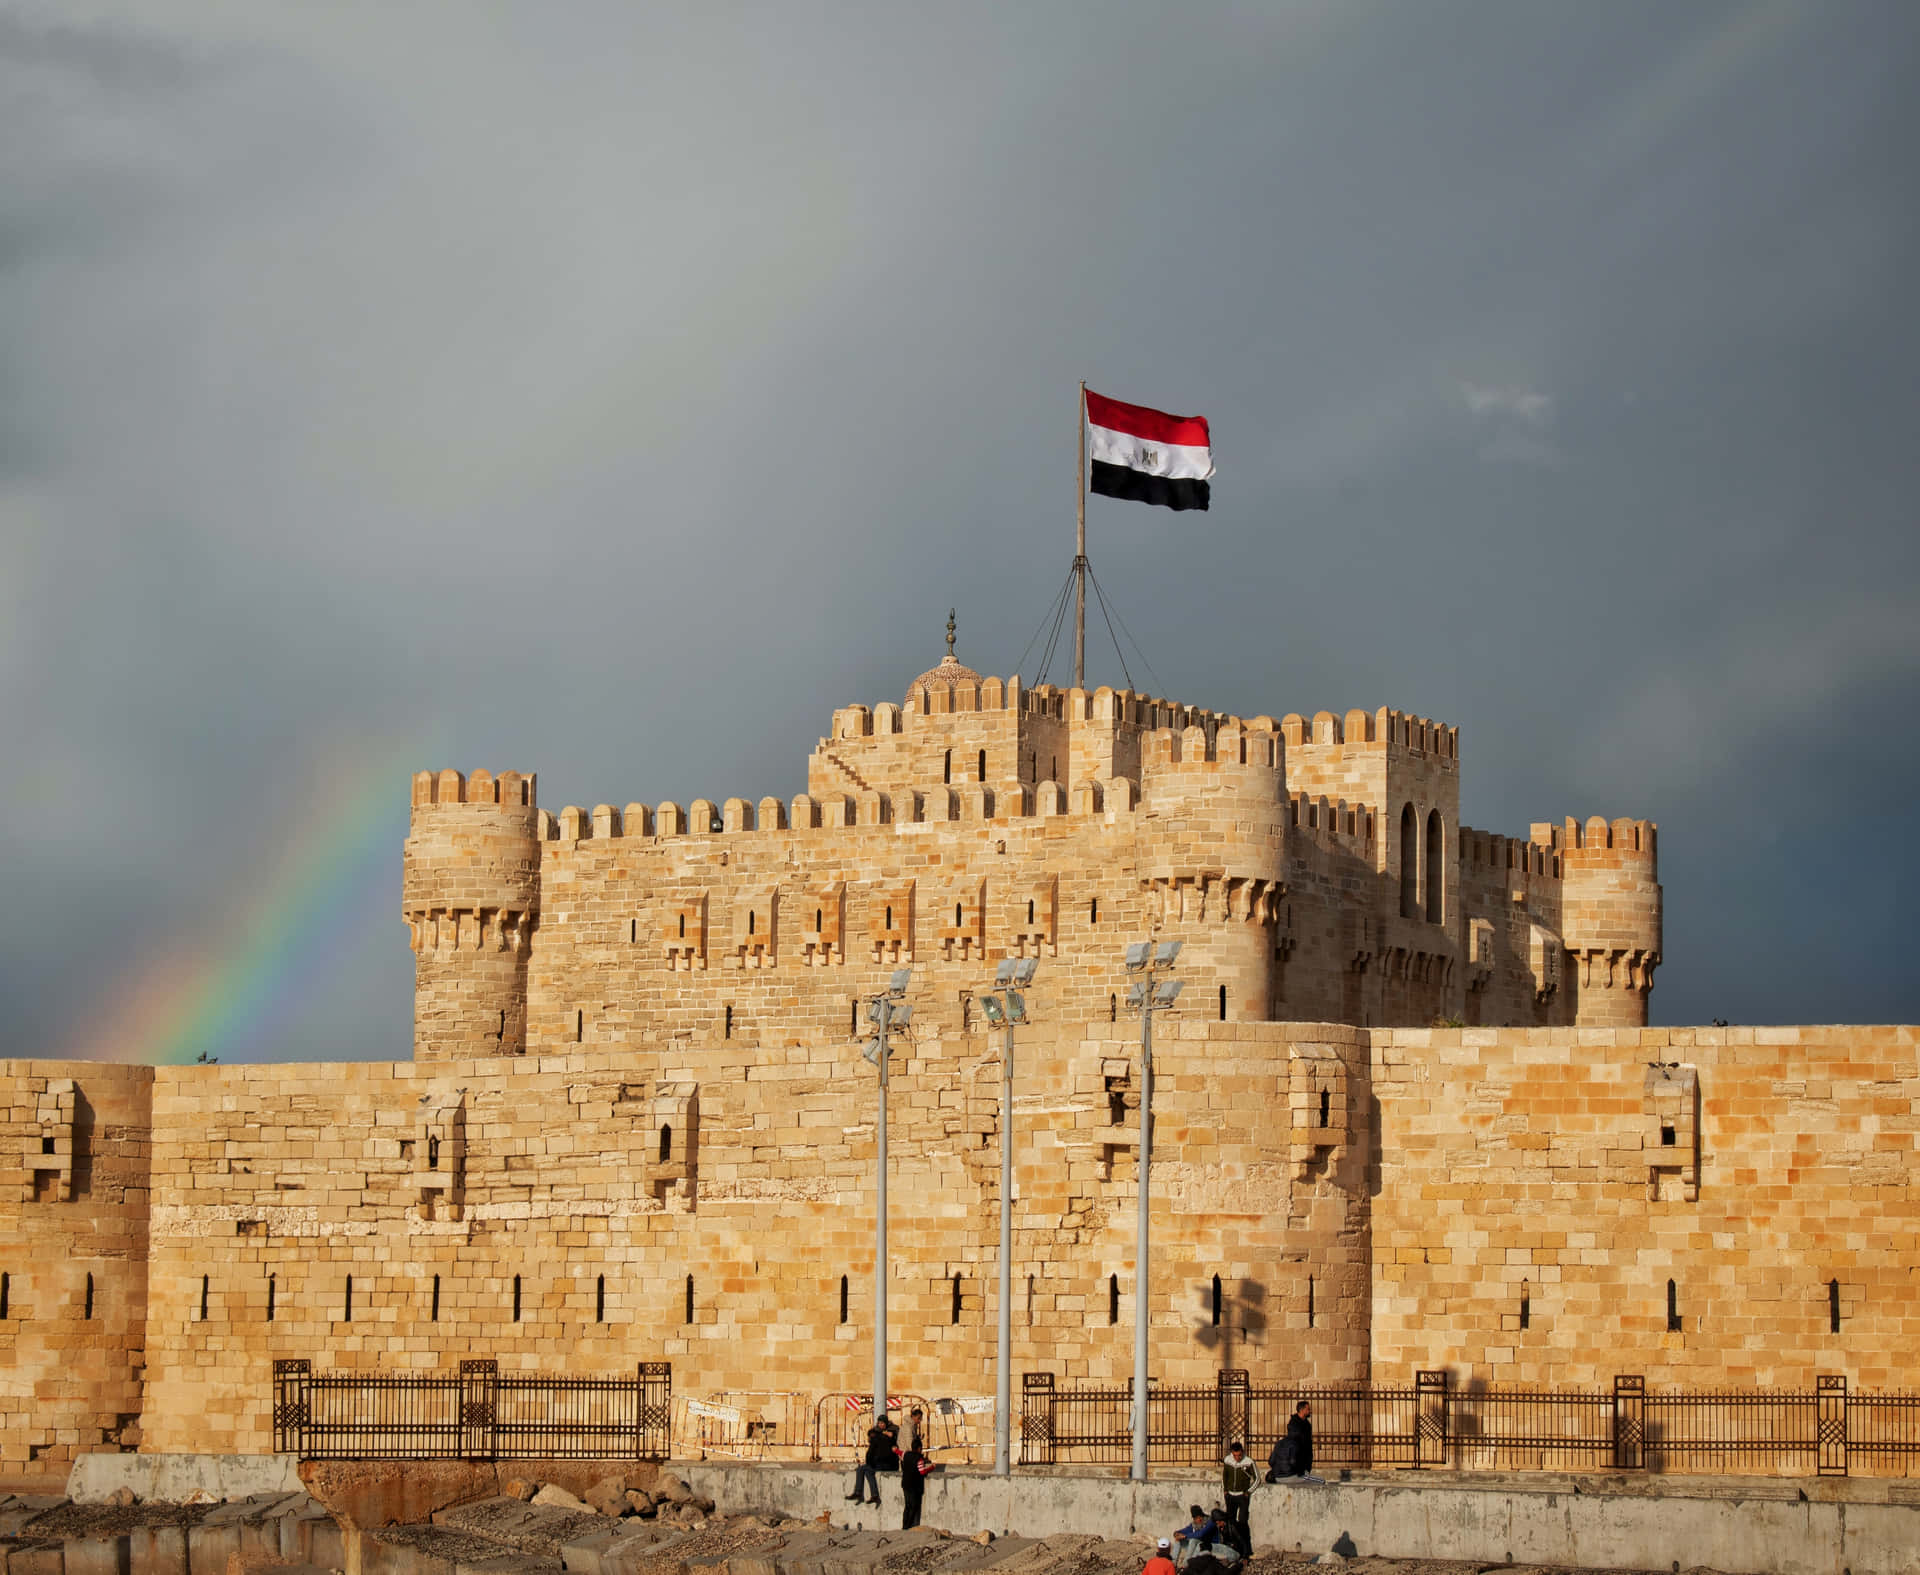 A Castle With A Rainbow Over It